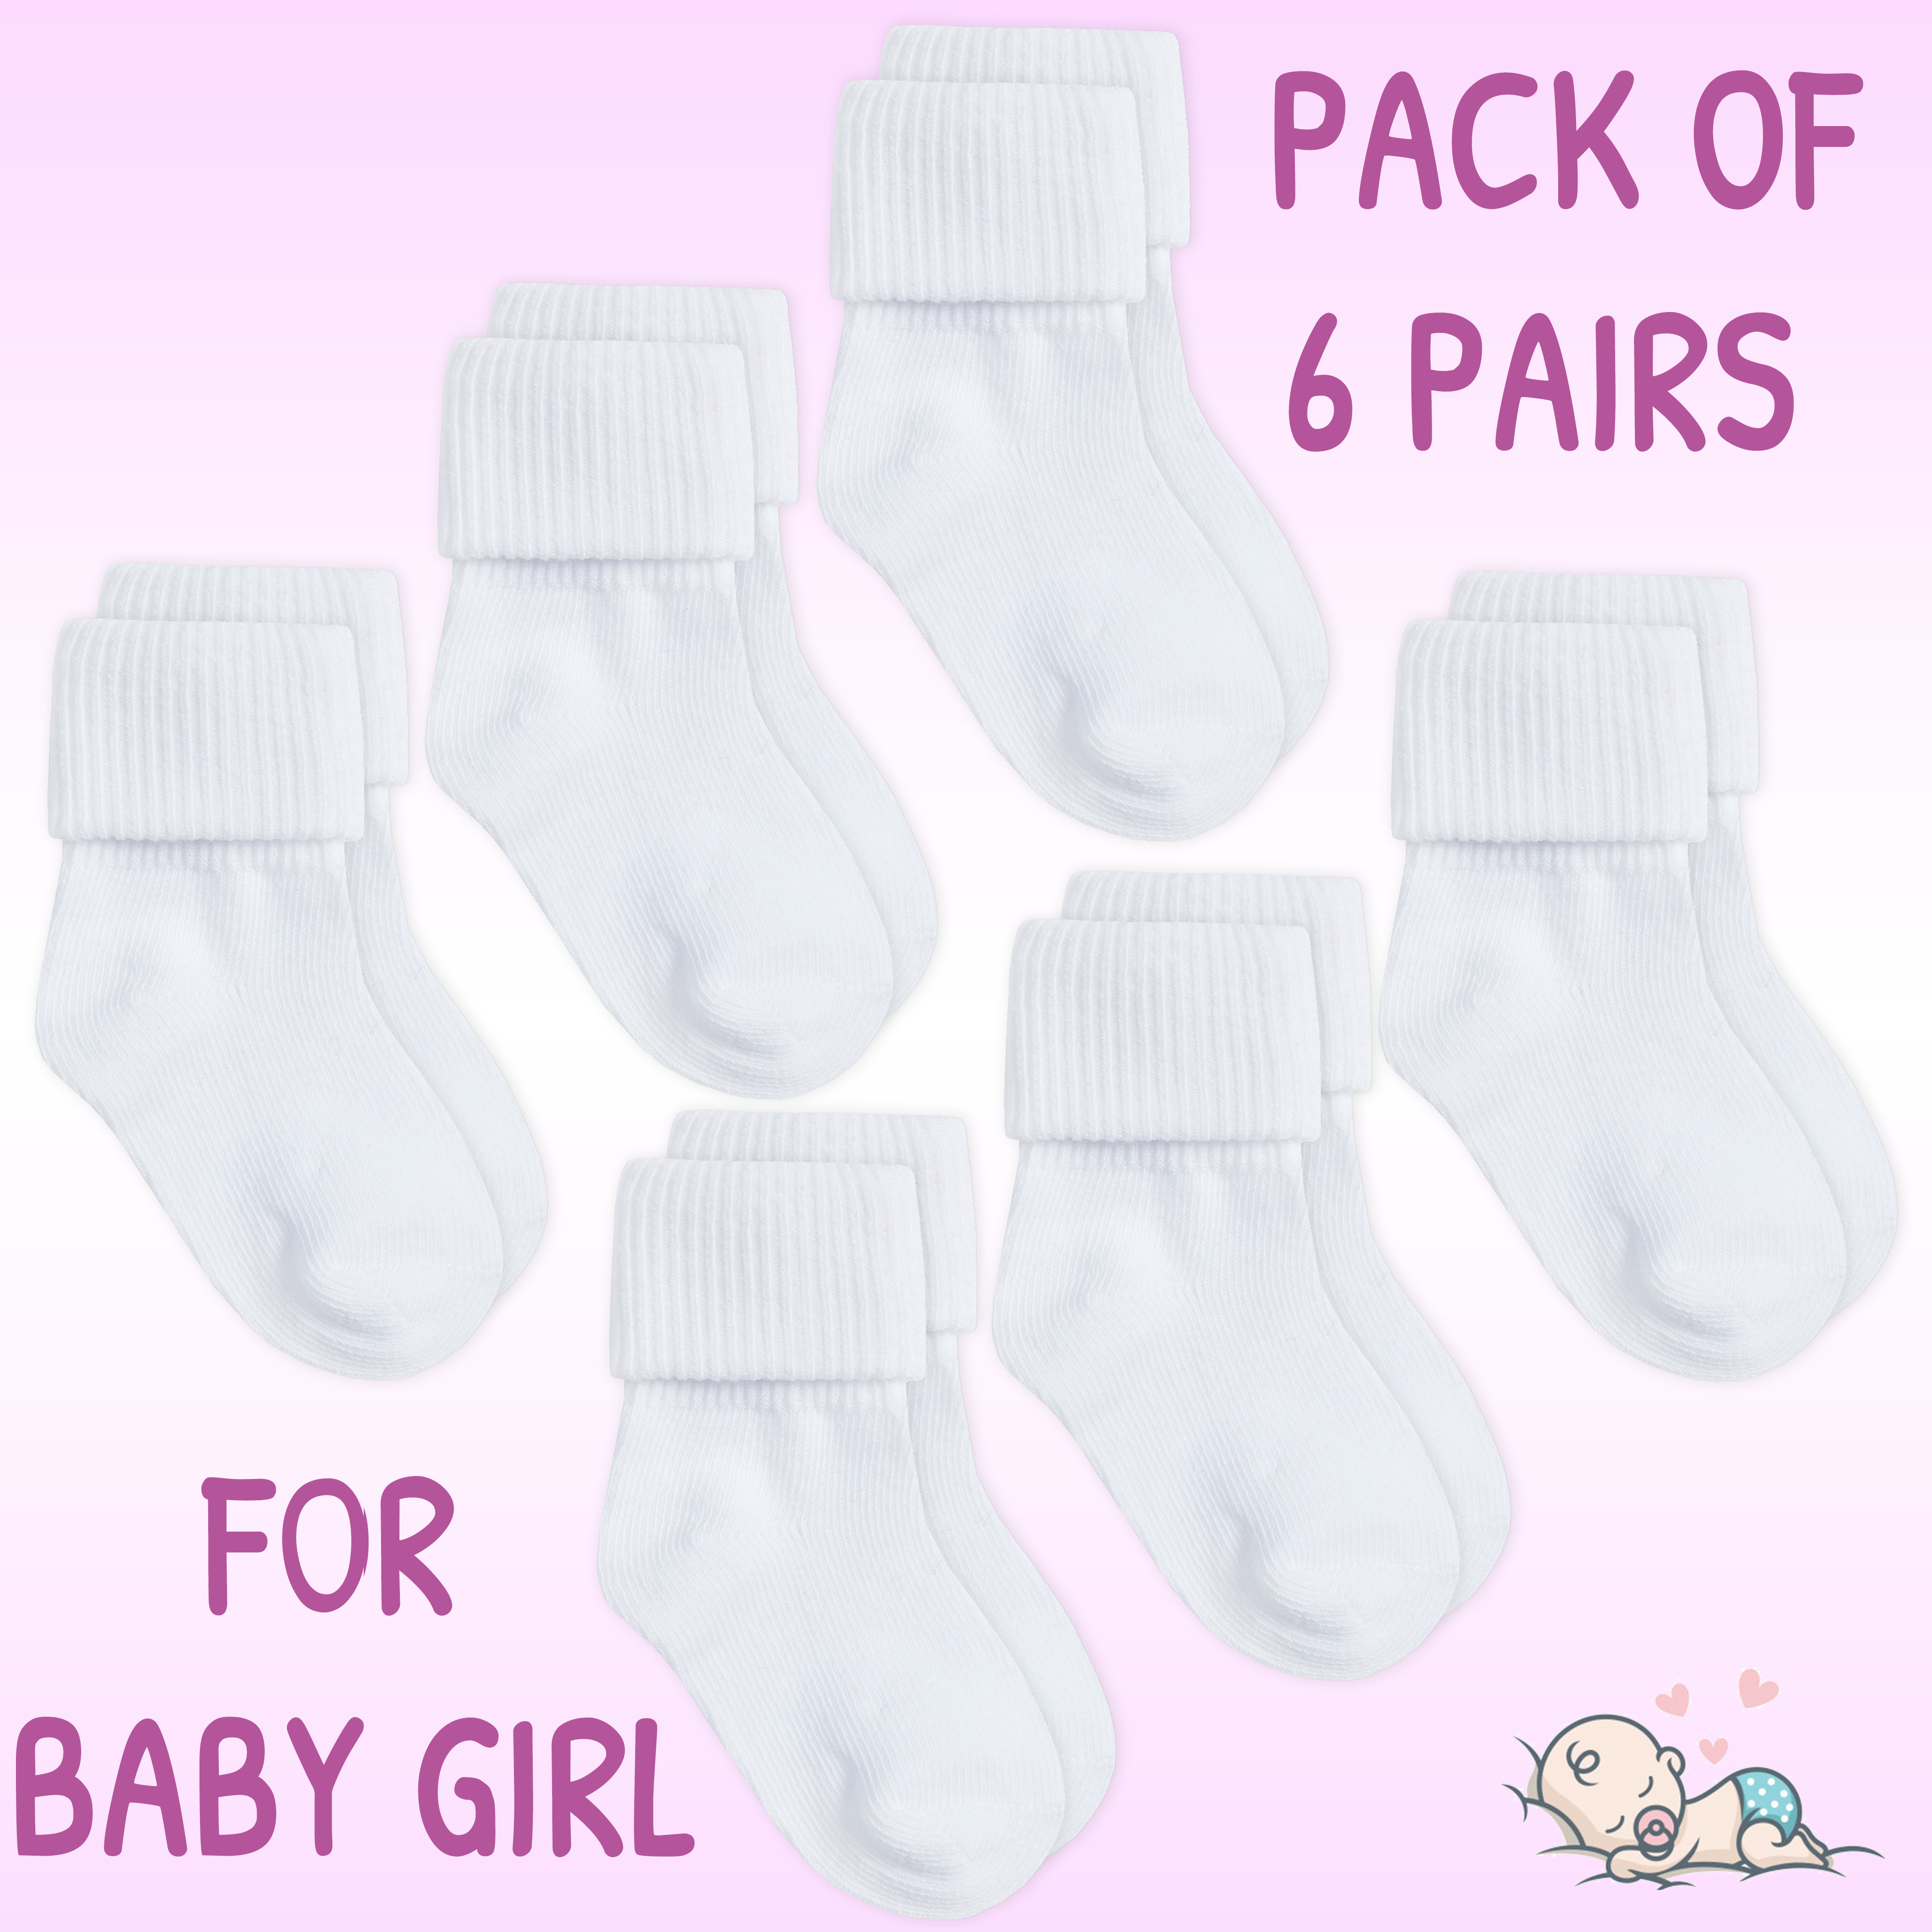 Soft Touch New Baby Socks Cotton Rich Turnover Plain White 3-6 6-12 12-24 Months 